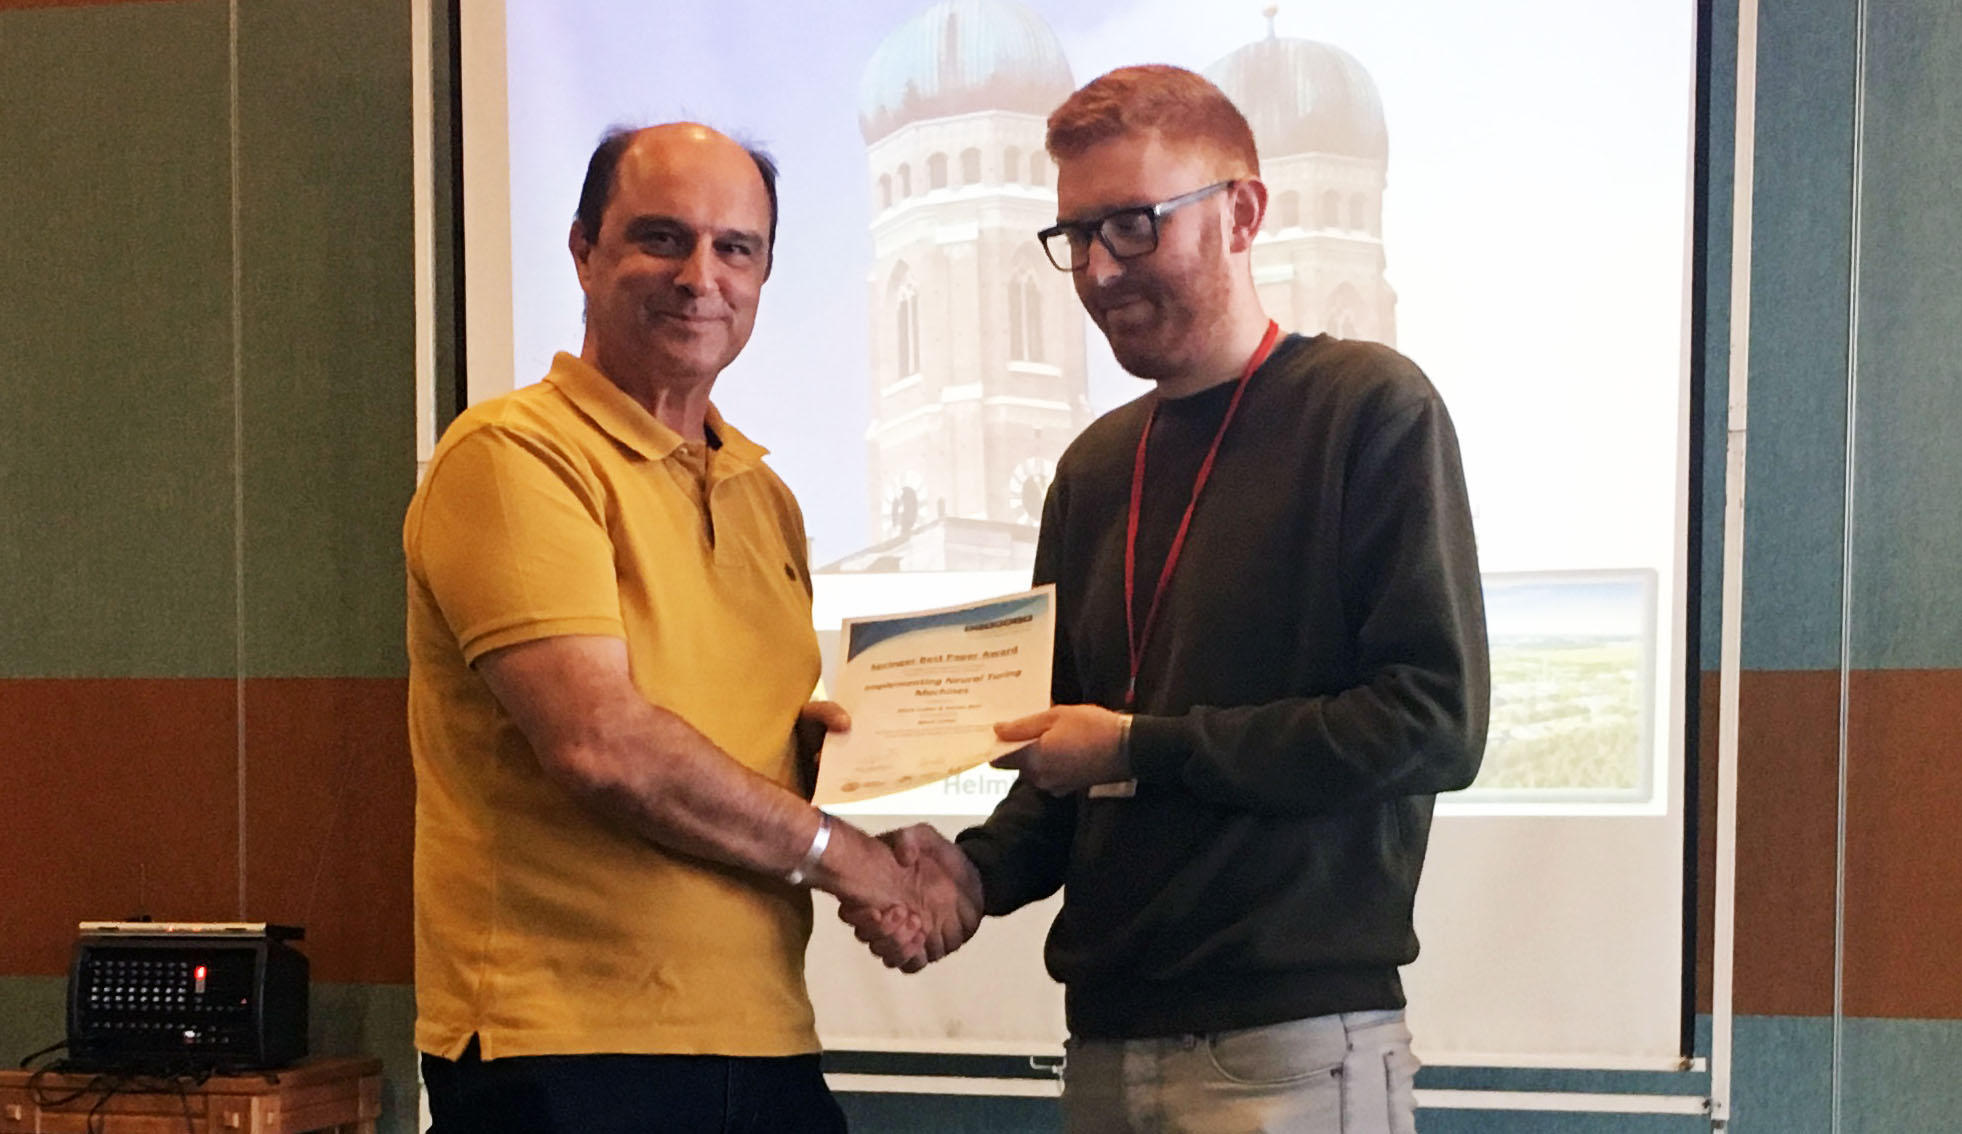 ICANN 2018 Best Paper Award - Implementing Neural Turing Machines